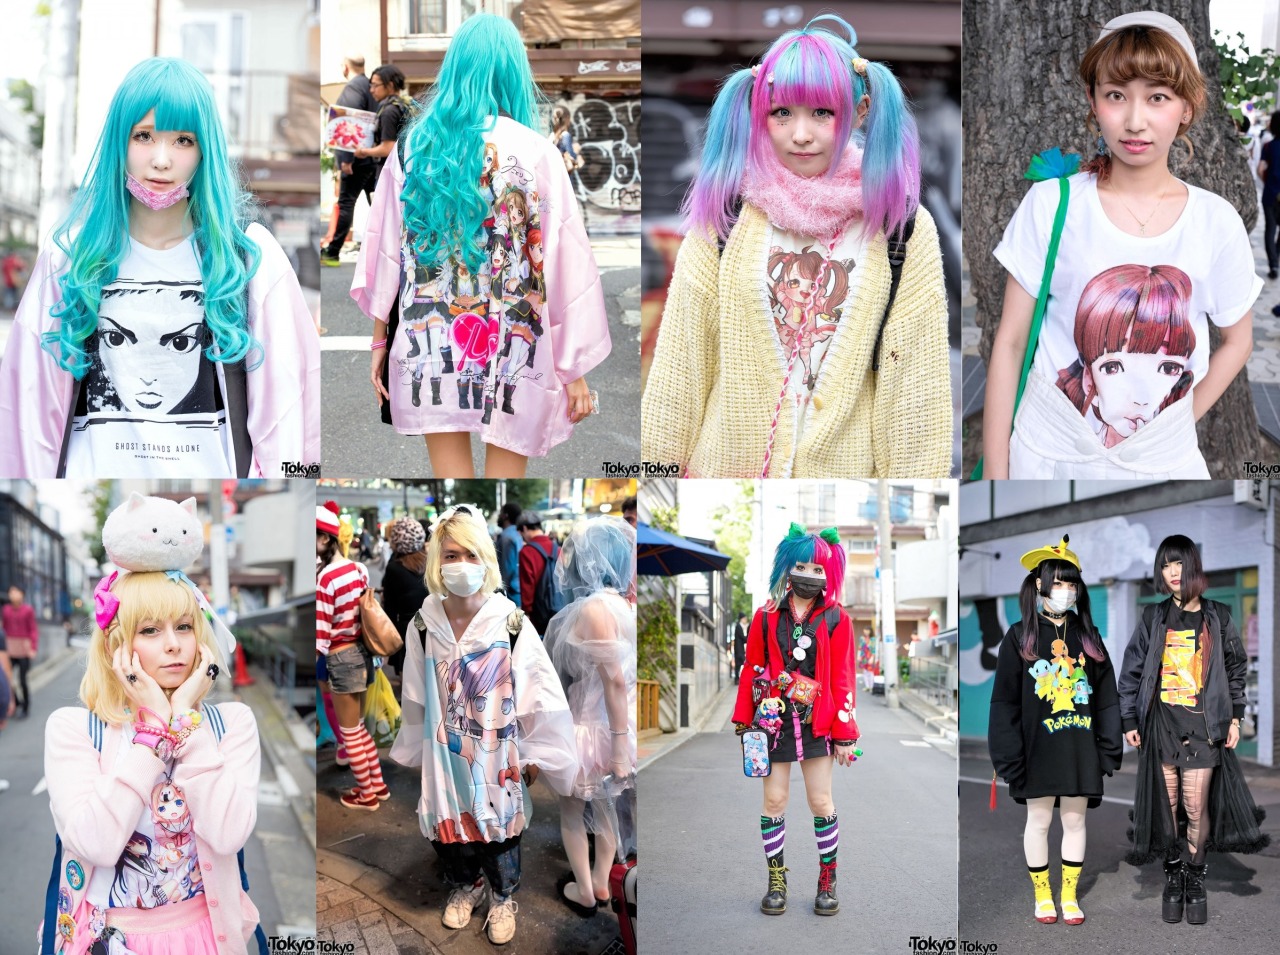 How Japanese Anime Is Influencing Fashion by Aybuke Barkcin  A Shaded View  on Fashion